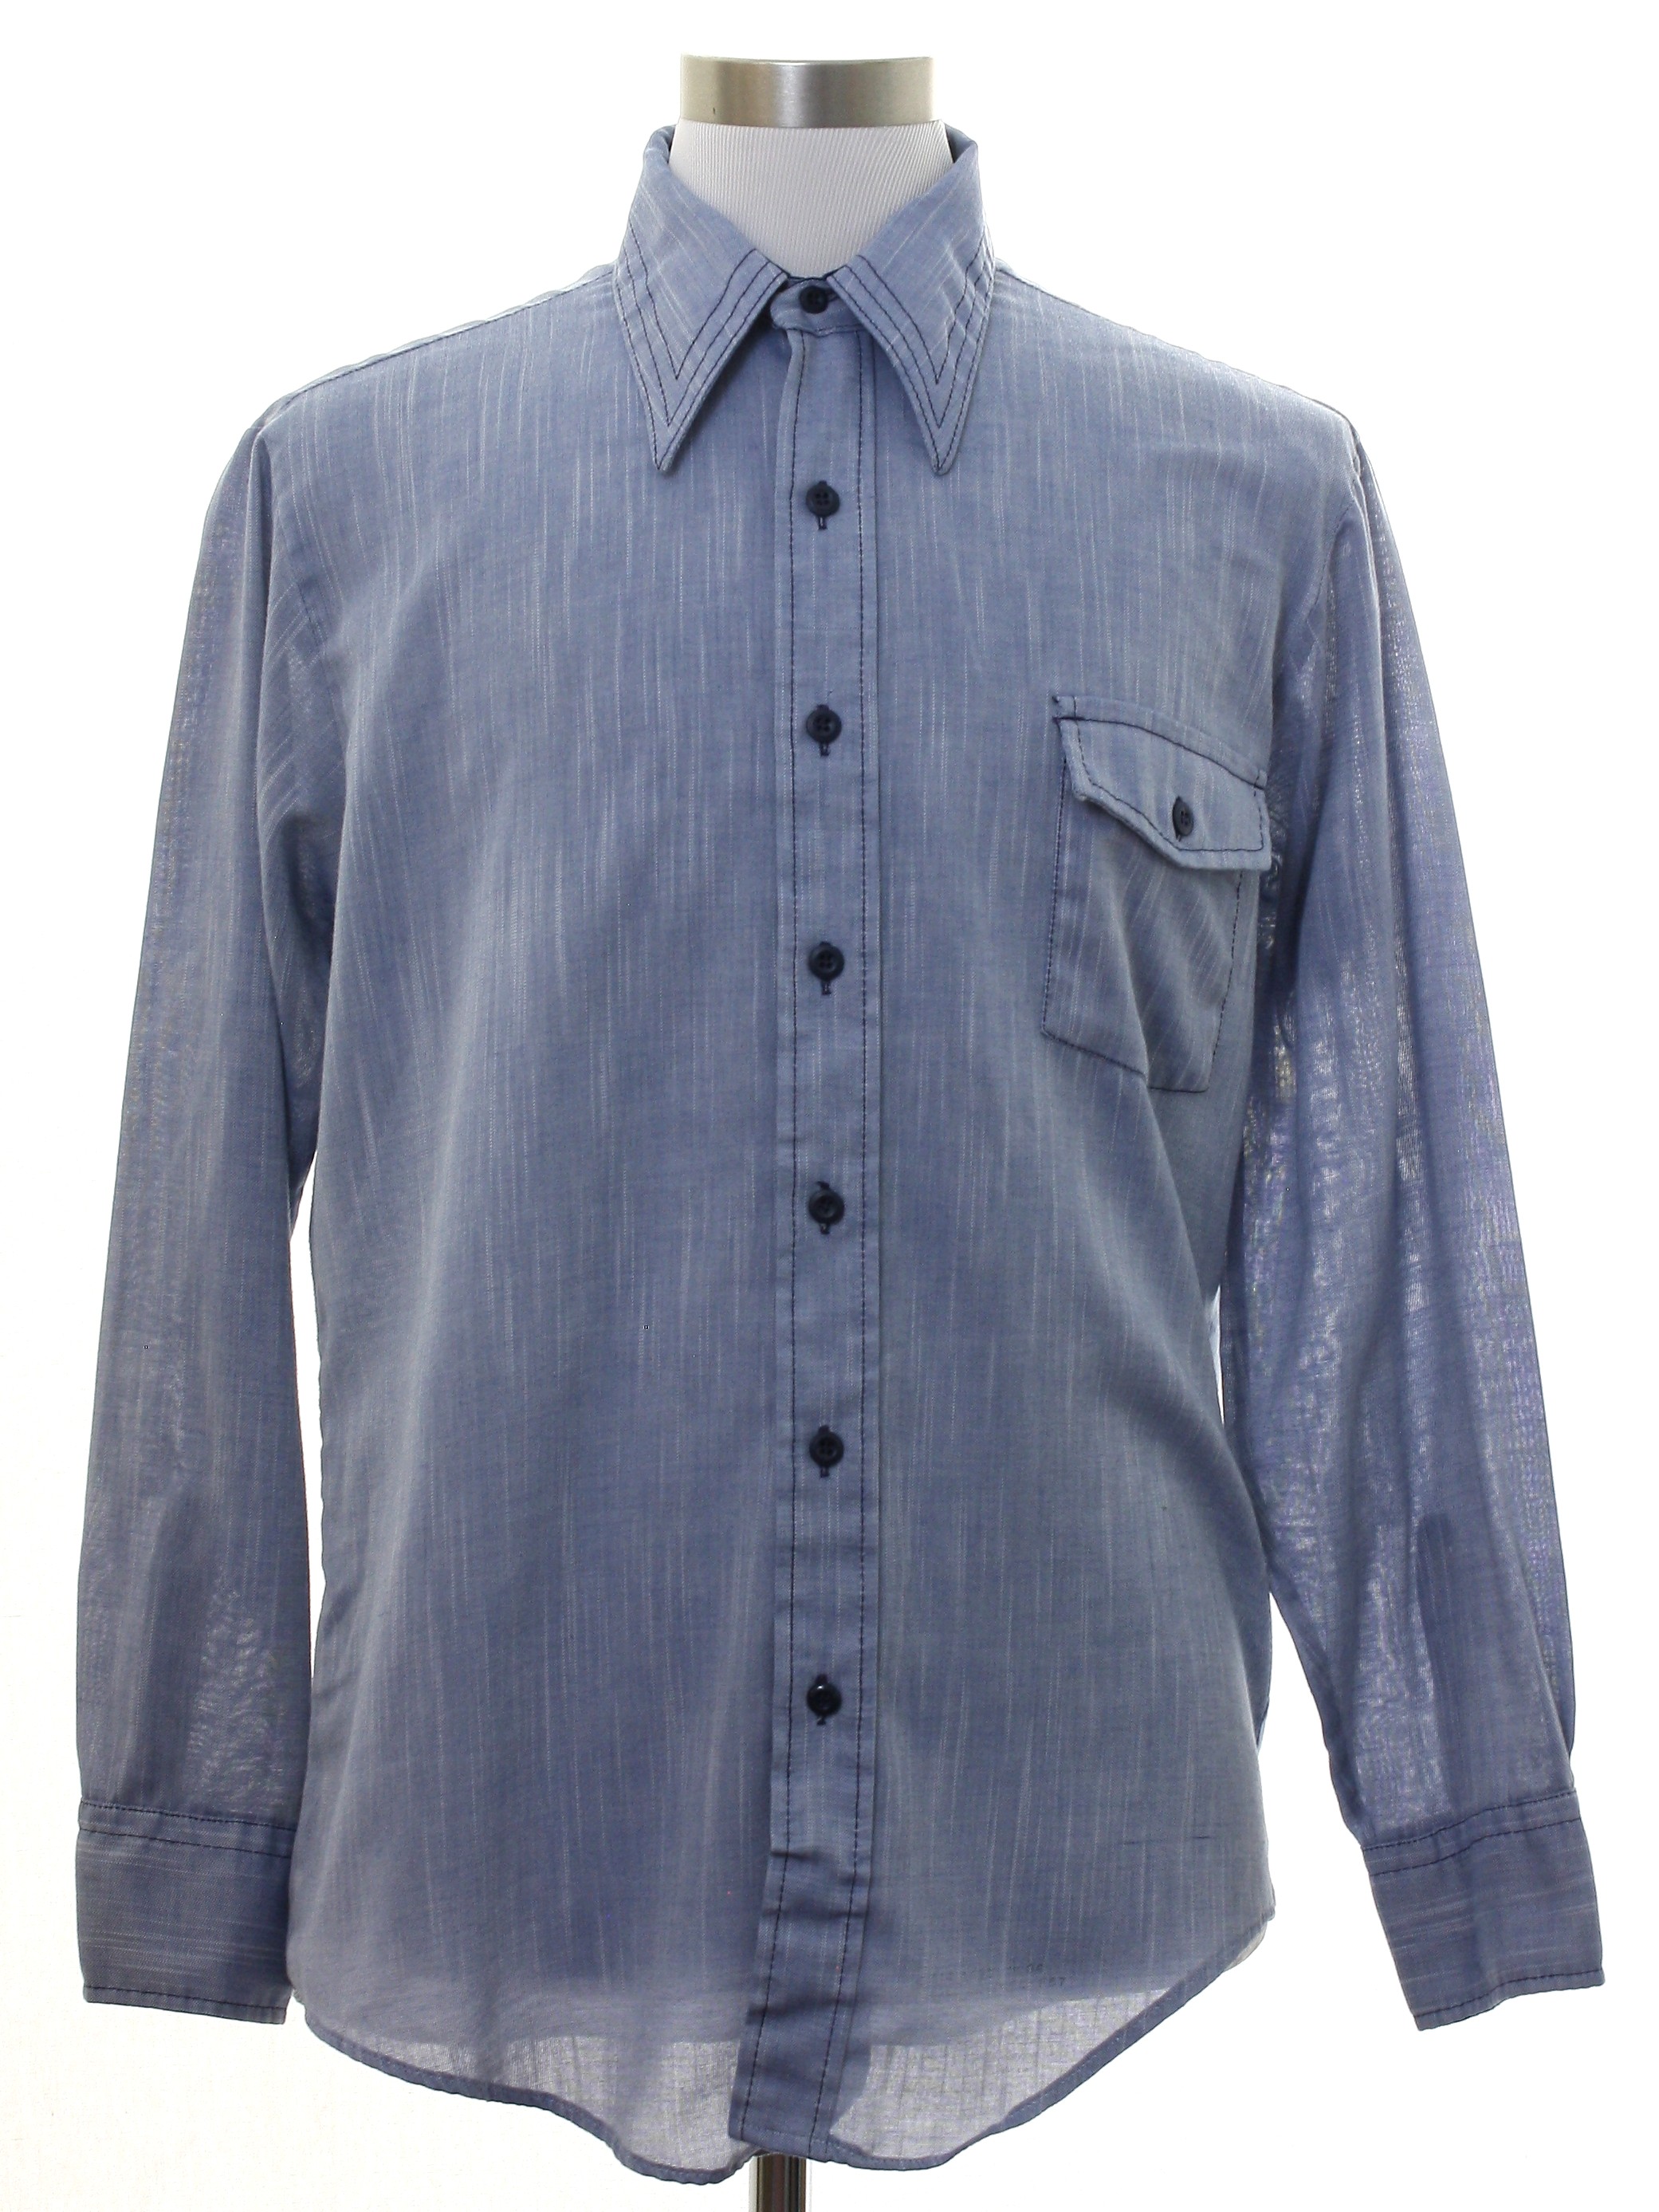 JC Penney Seventies Vintage Shirt: 70s -JC Penney- Mens hazy shades of ...